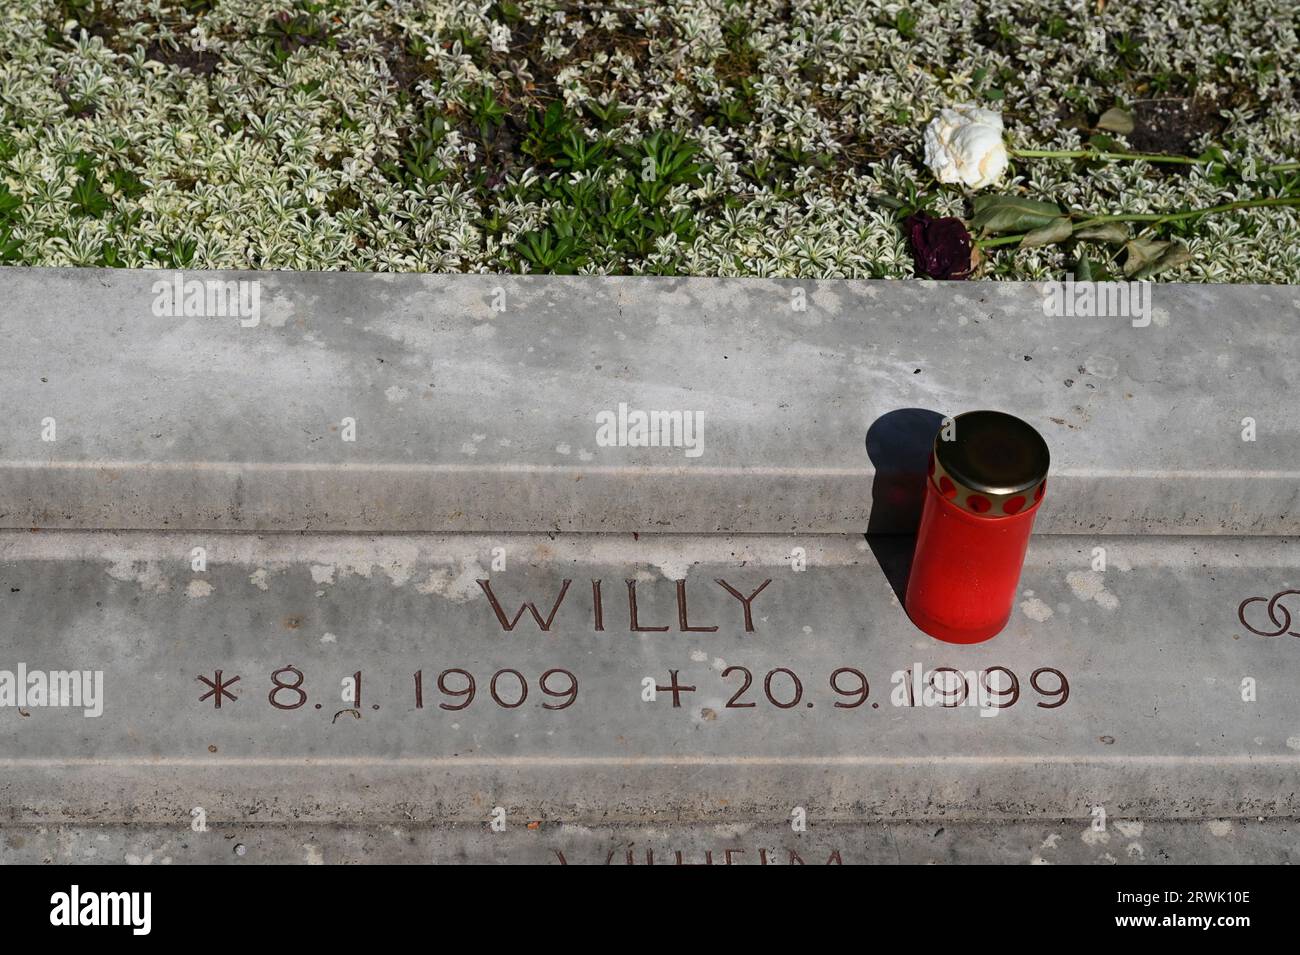 Cologne, Germany. 10th Sep, 2023. Grave of the Millowitsch family, including Willy Millowitsch, at the Cologne celebrity cemetery Melaten Credit: Horst Galuschka/dpa/Horst Galuschka dpa/Alamy Live News Stock Photo